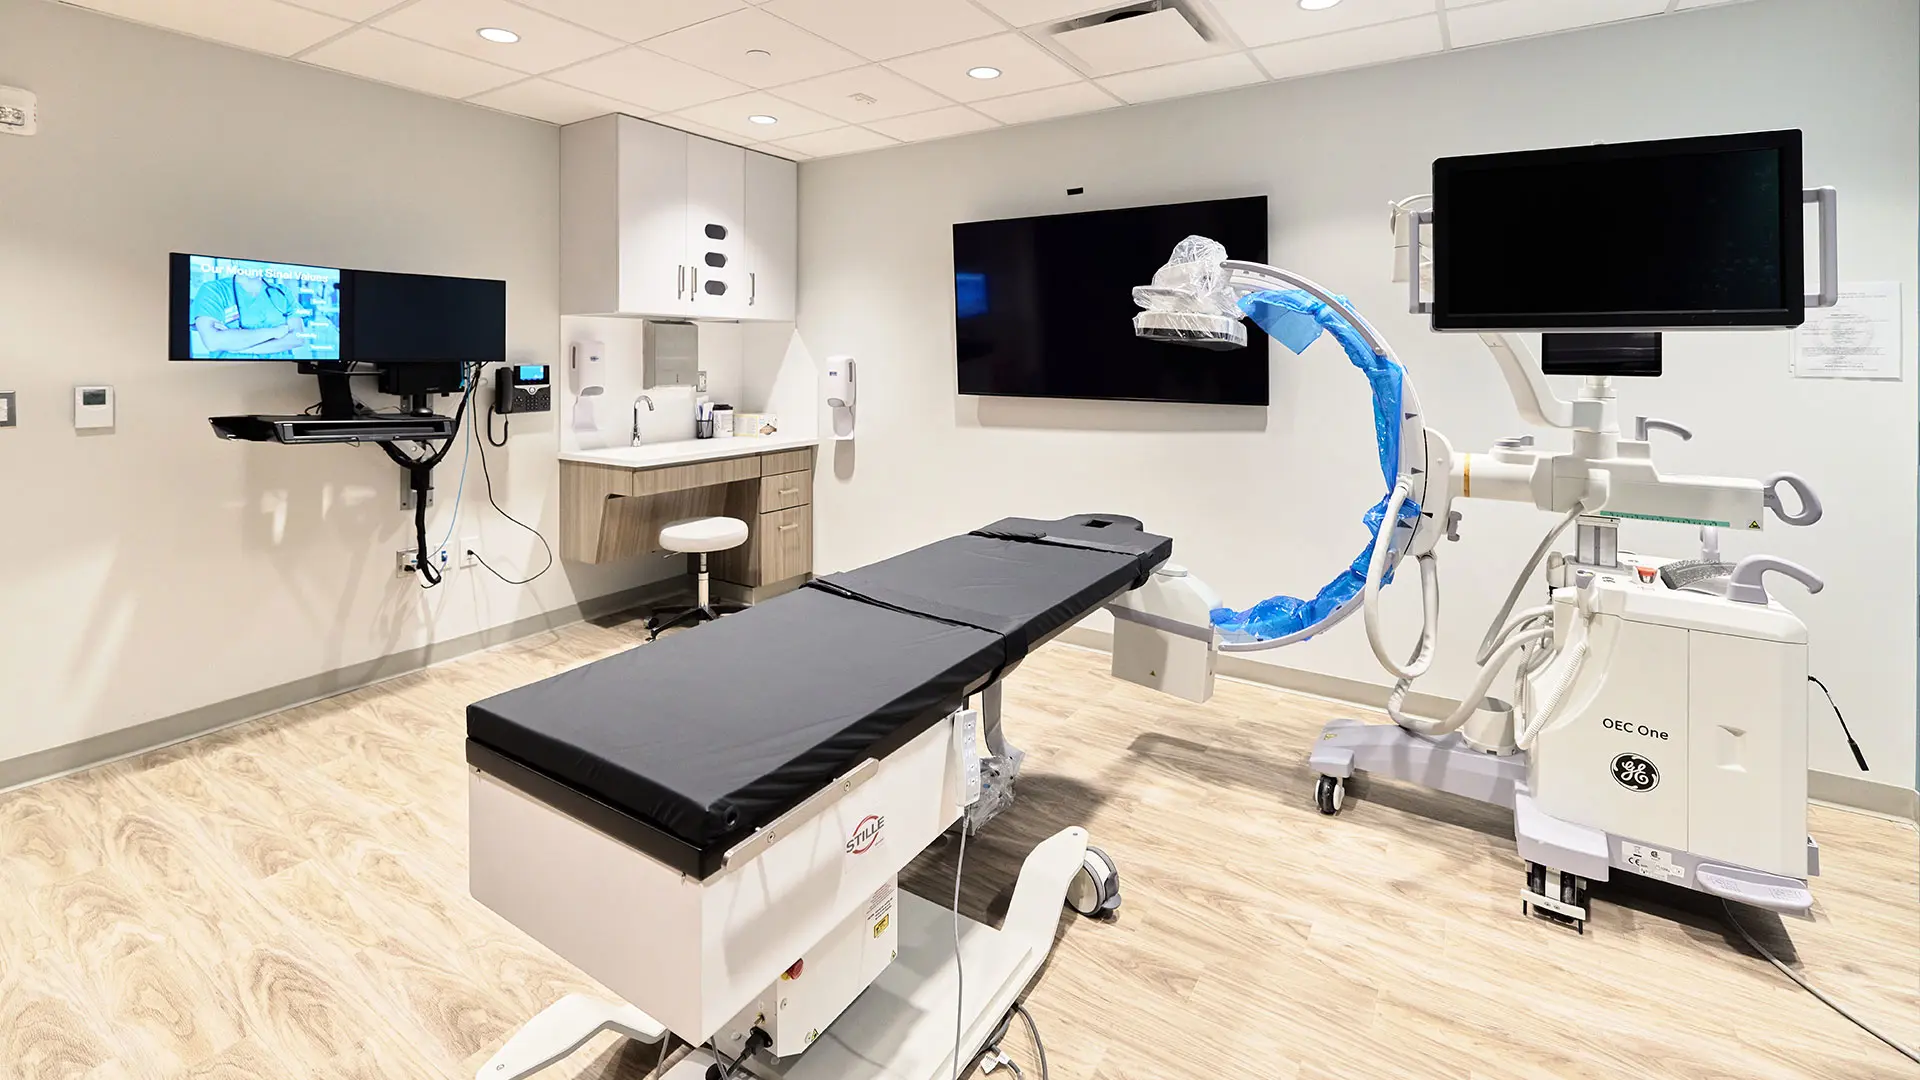 An on-site fluoroscopic procedure room in the Spine Center allows physiatrists and pain management physicians to perform various pain procedures, such as epidural and facet injections.